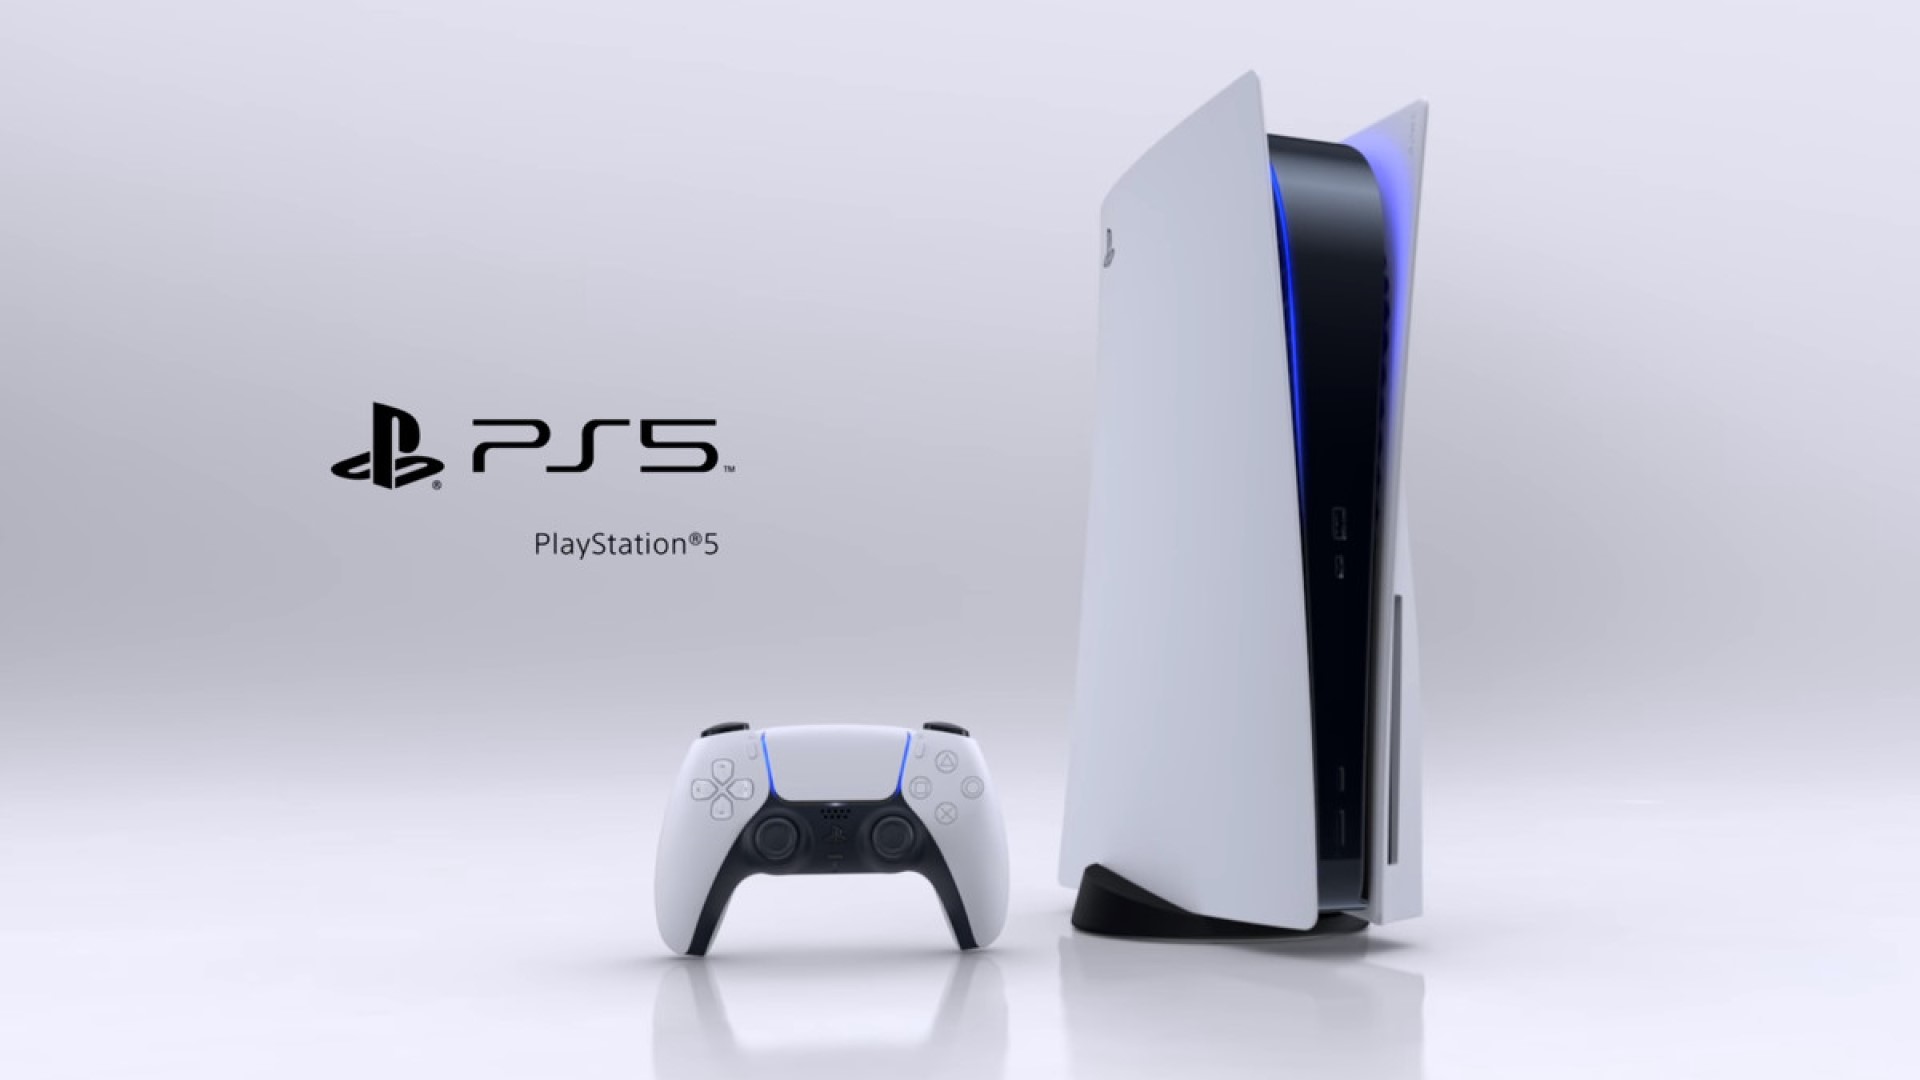 Global PS5 Sales by Sony Exceed 30 Million Units